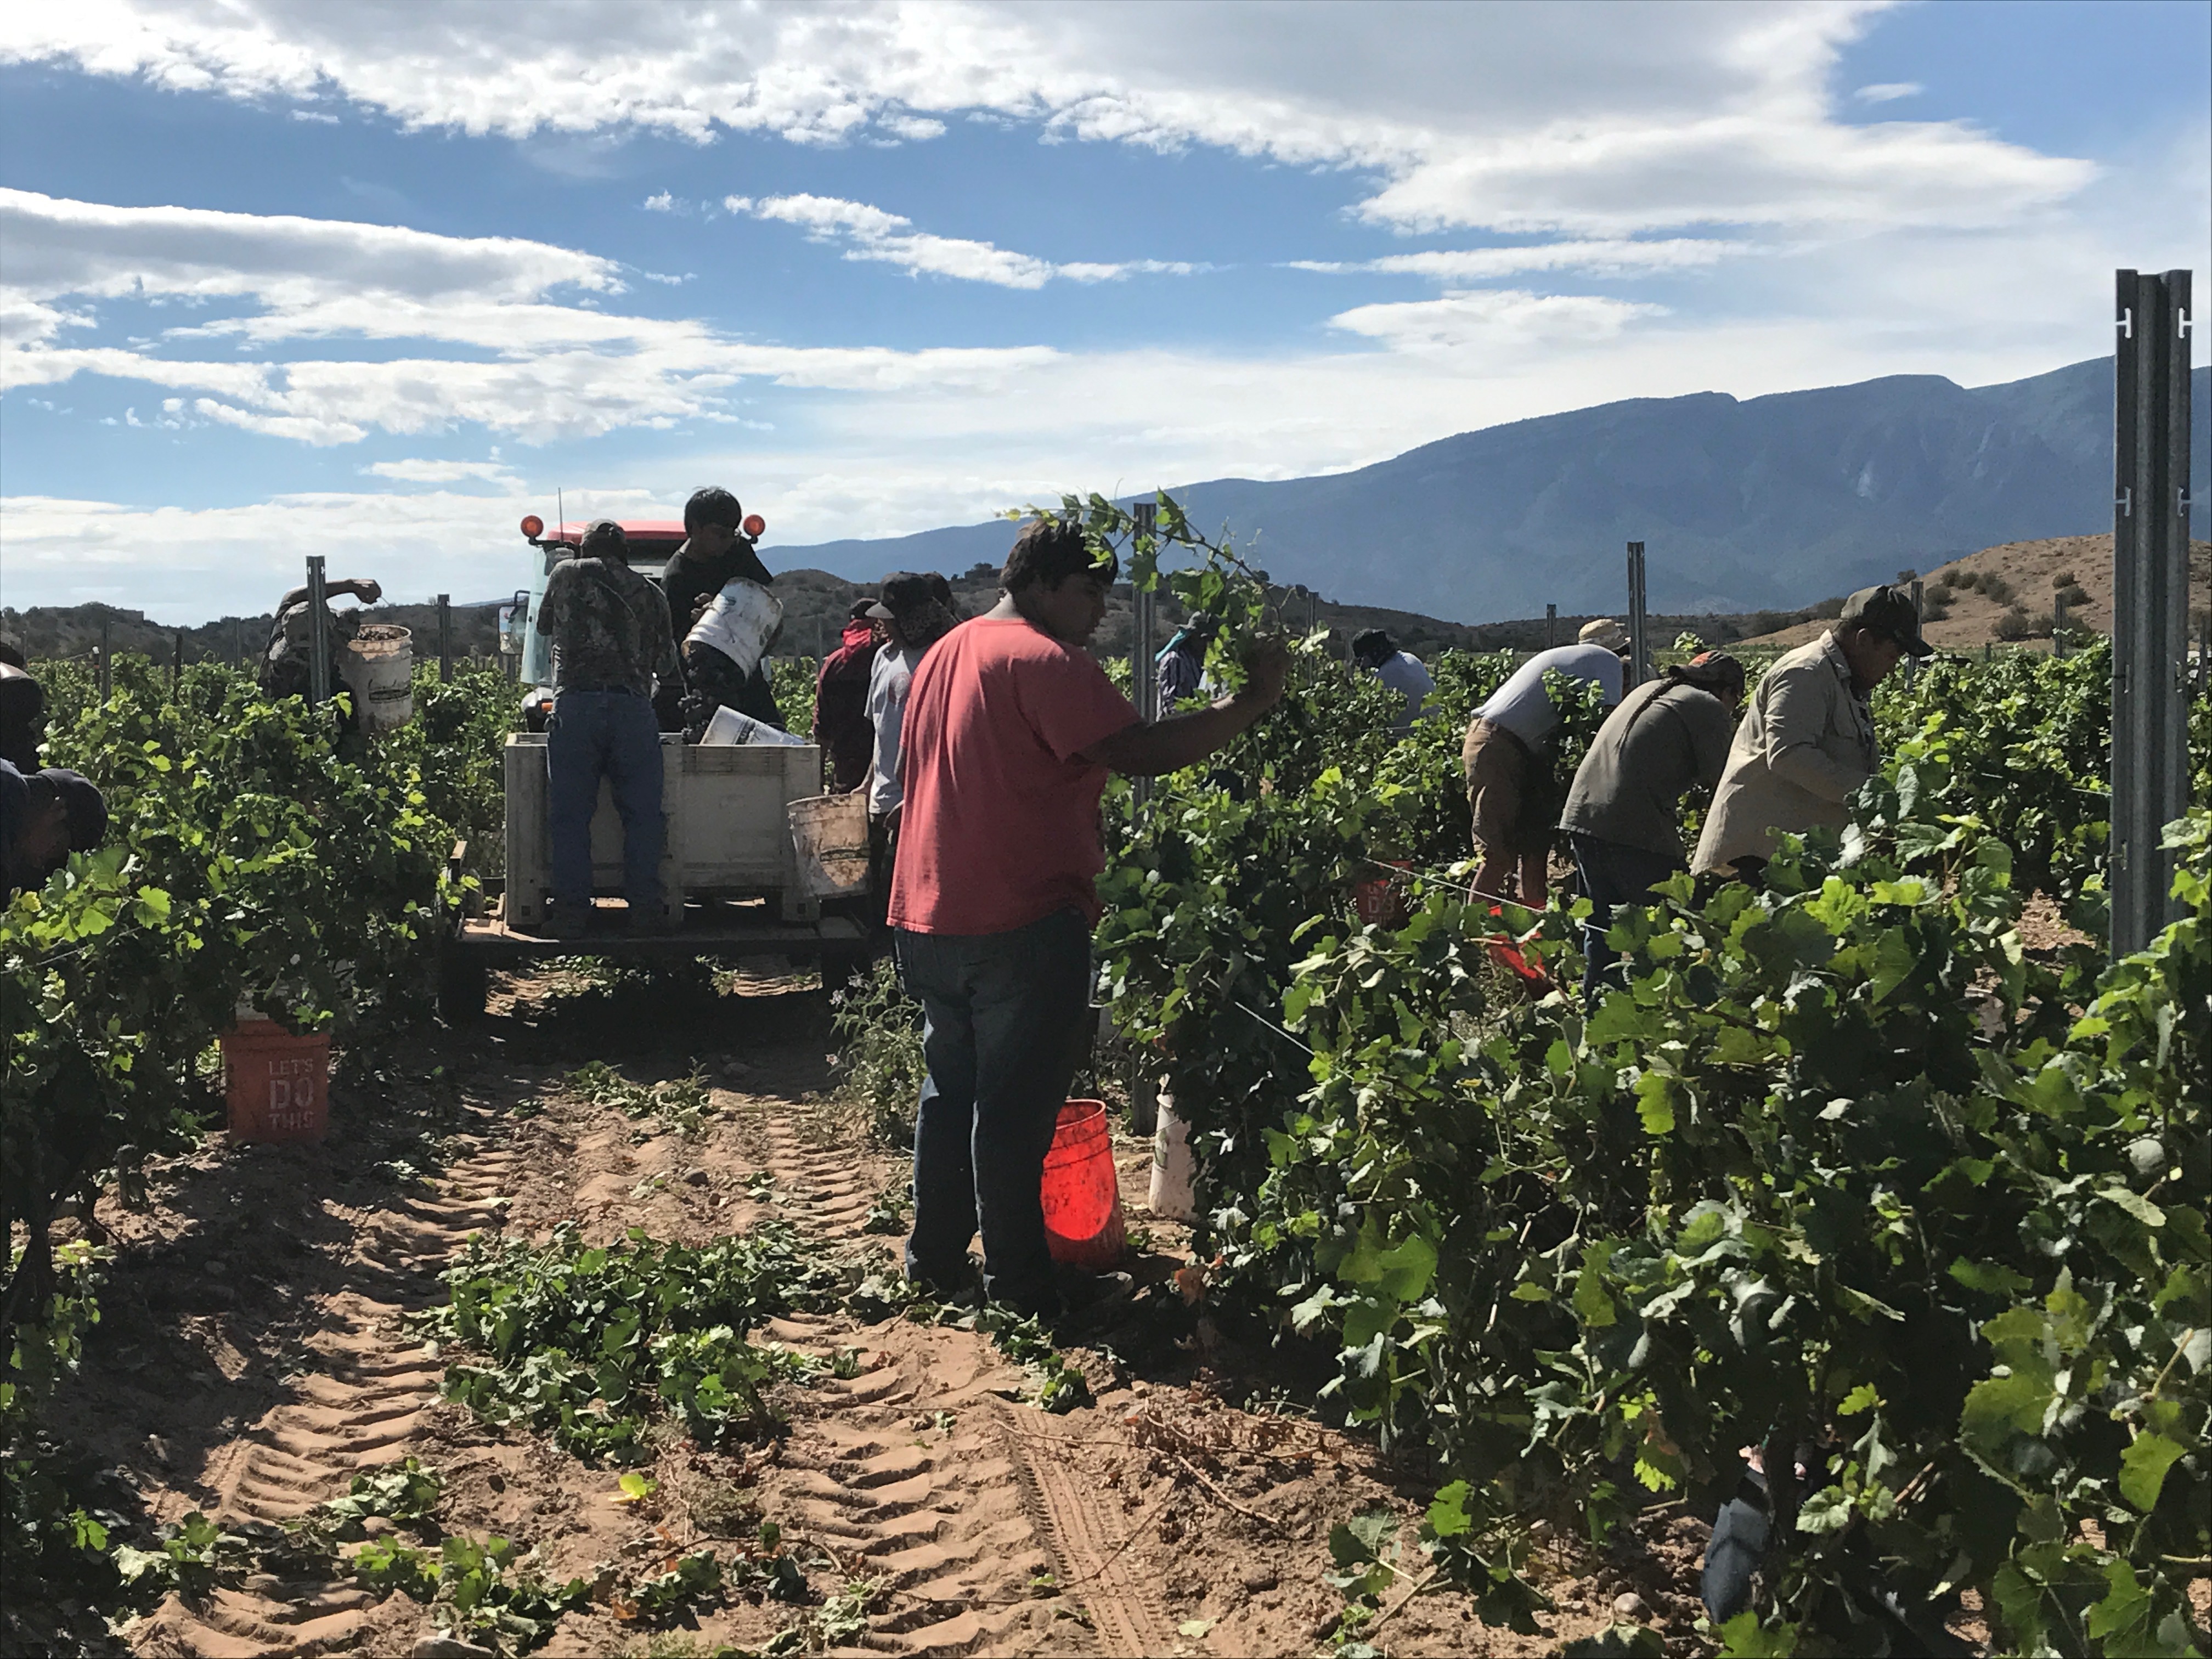 At the Tamaya Vineyard workers hand-select the finest New Mexico fruit for Gruet Winery,including the state's first Pinot Meunier.